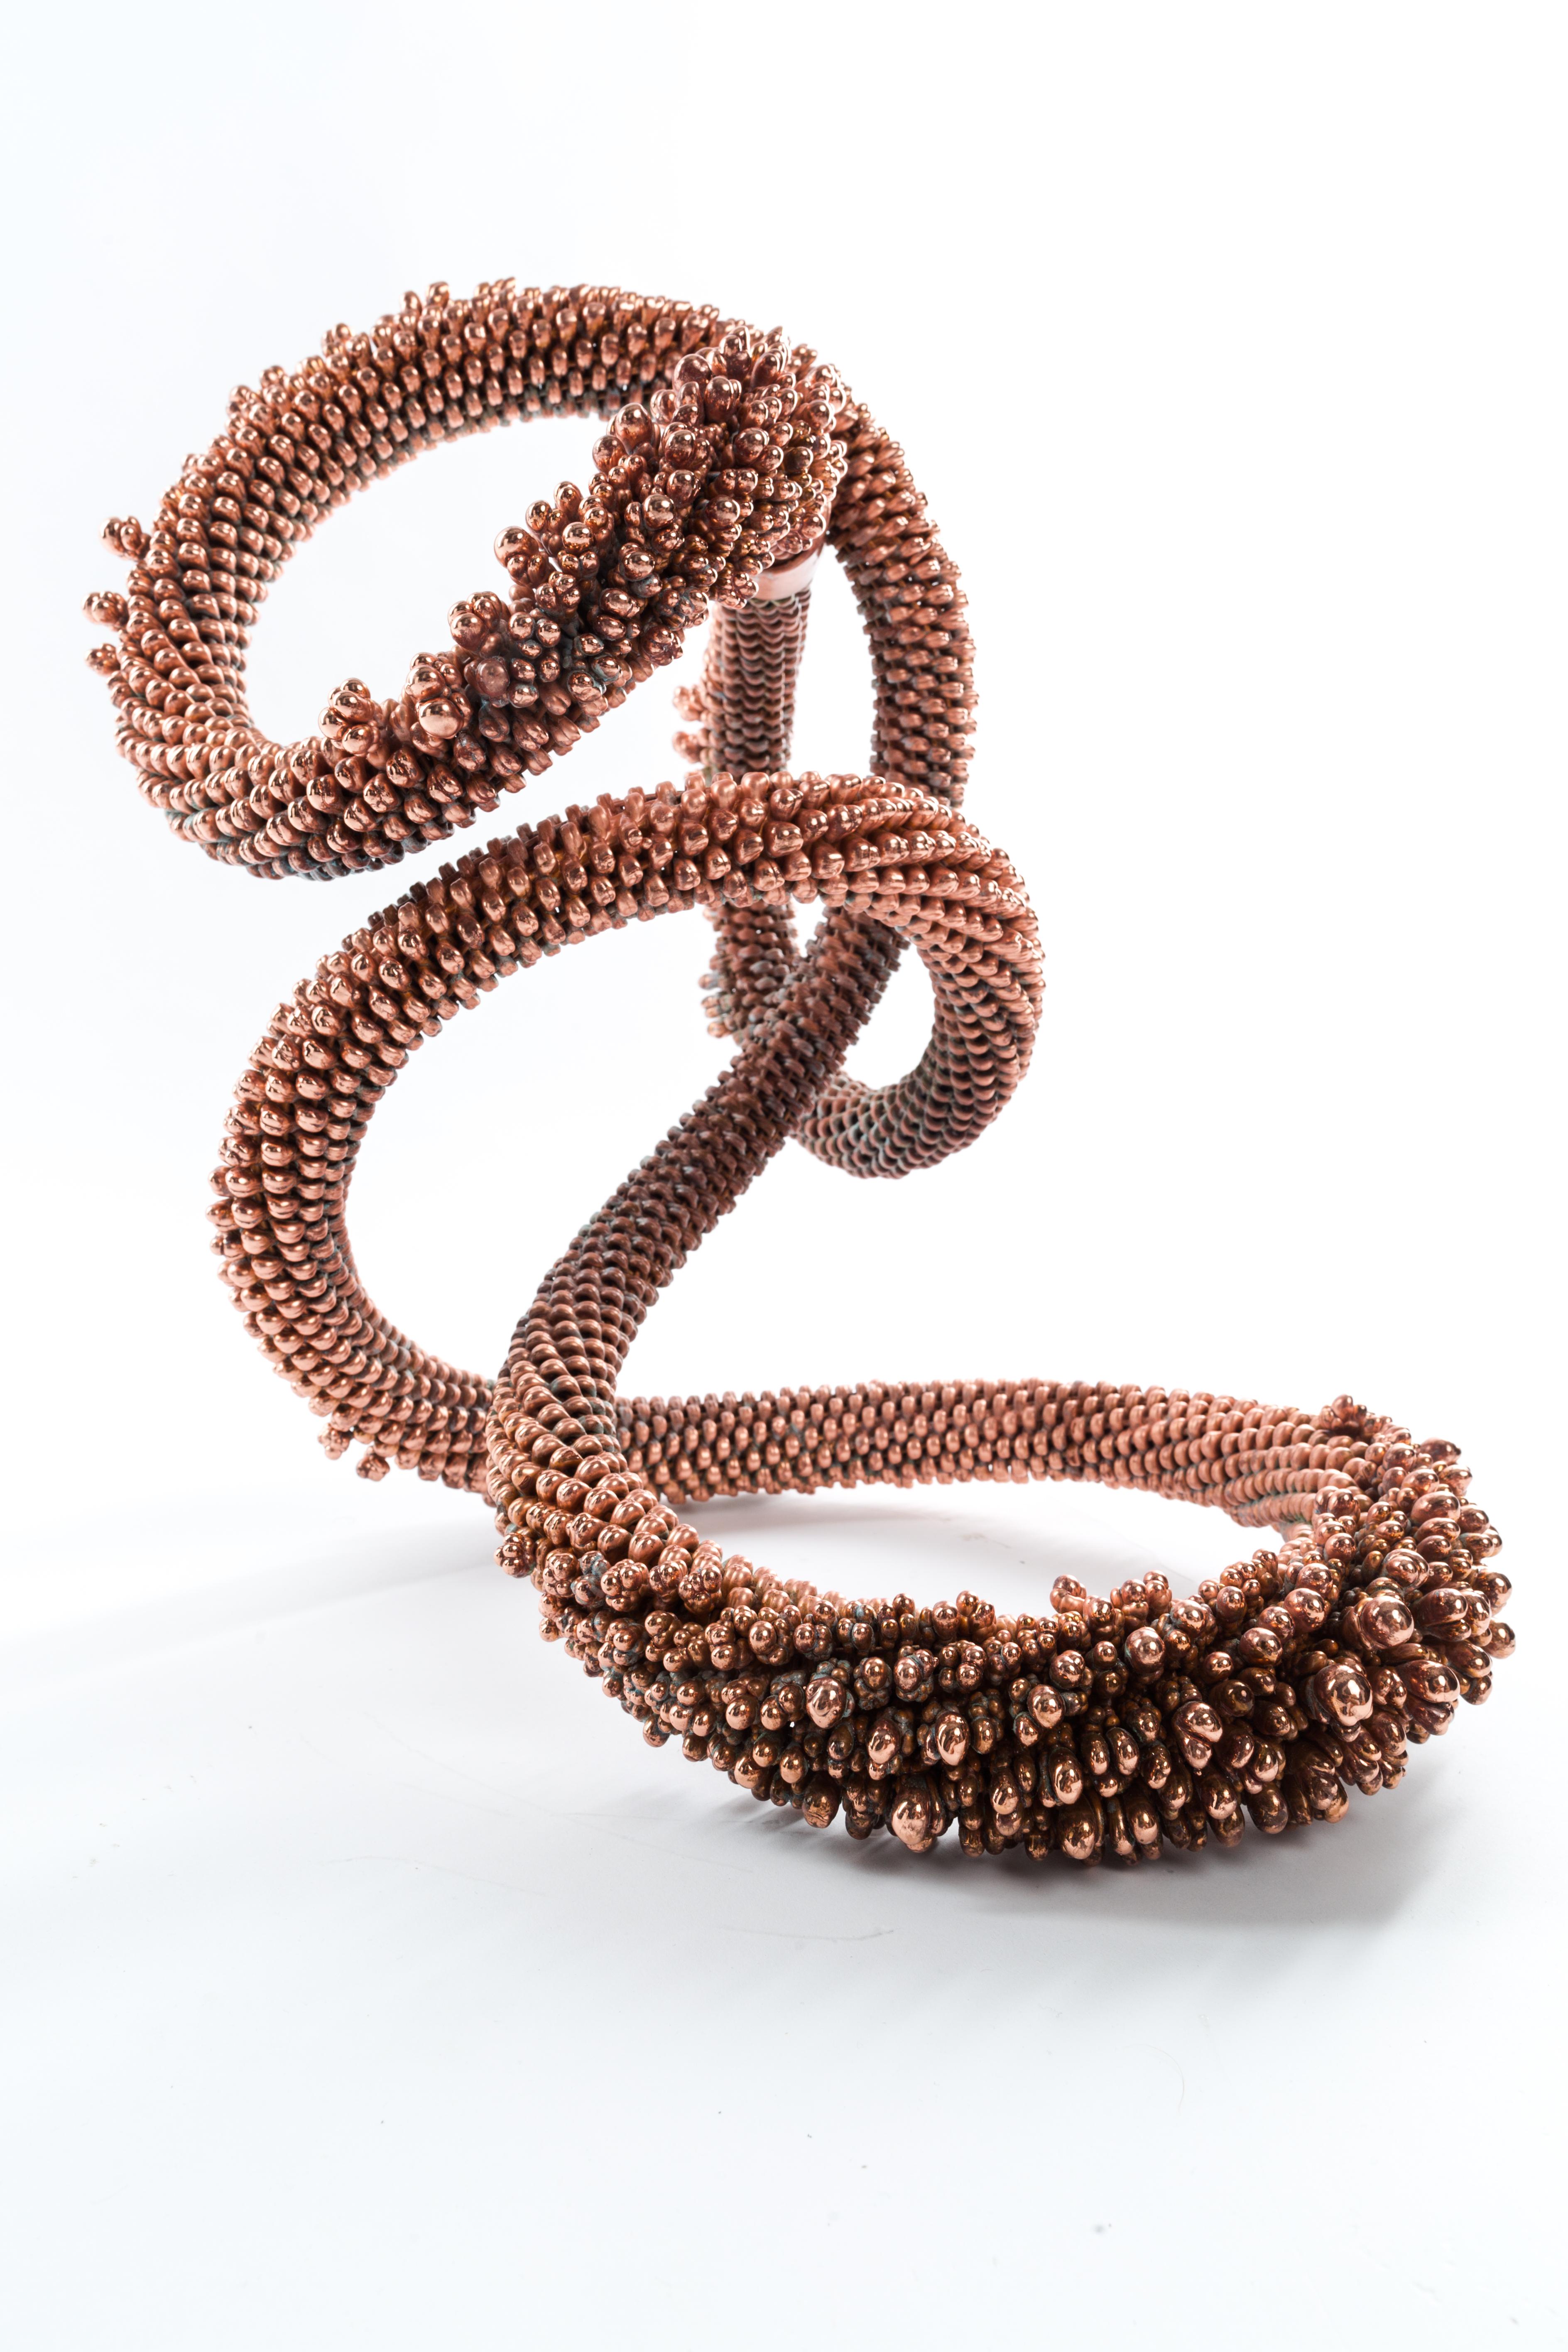 Crystal Whisp 002
Copper
1/1
Copper Growth
43cm x 33cm x 40cm
9.5Kg
2021

Whisps are meticulously constructed organic sculptural expressions. These expressions are symbolic of what the mind feels like to artist Driaan Claassen as he explores the